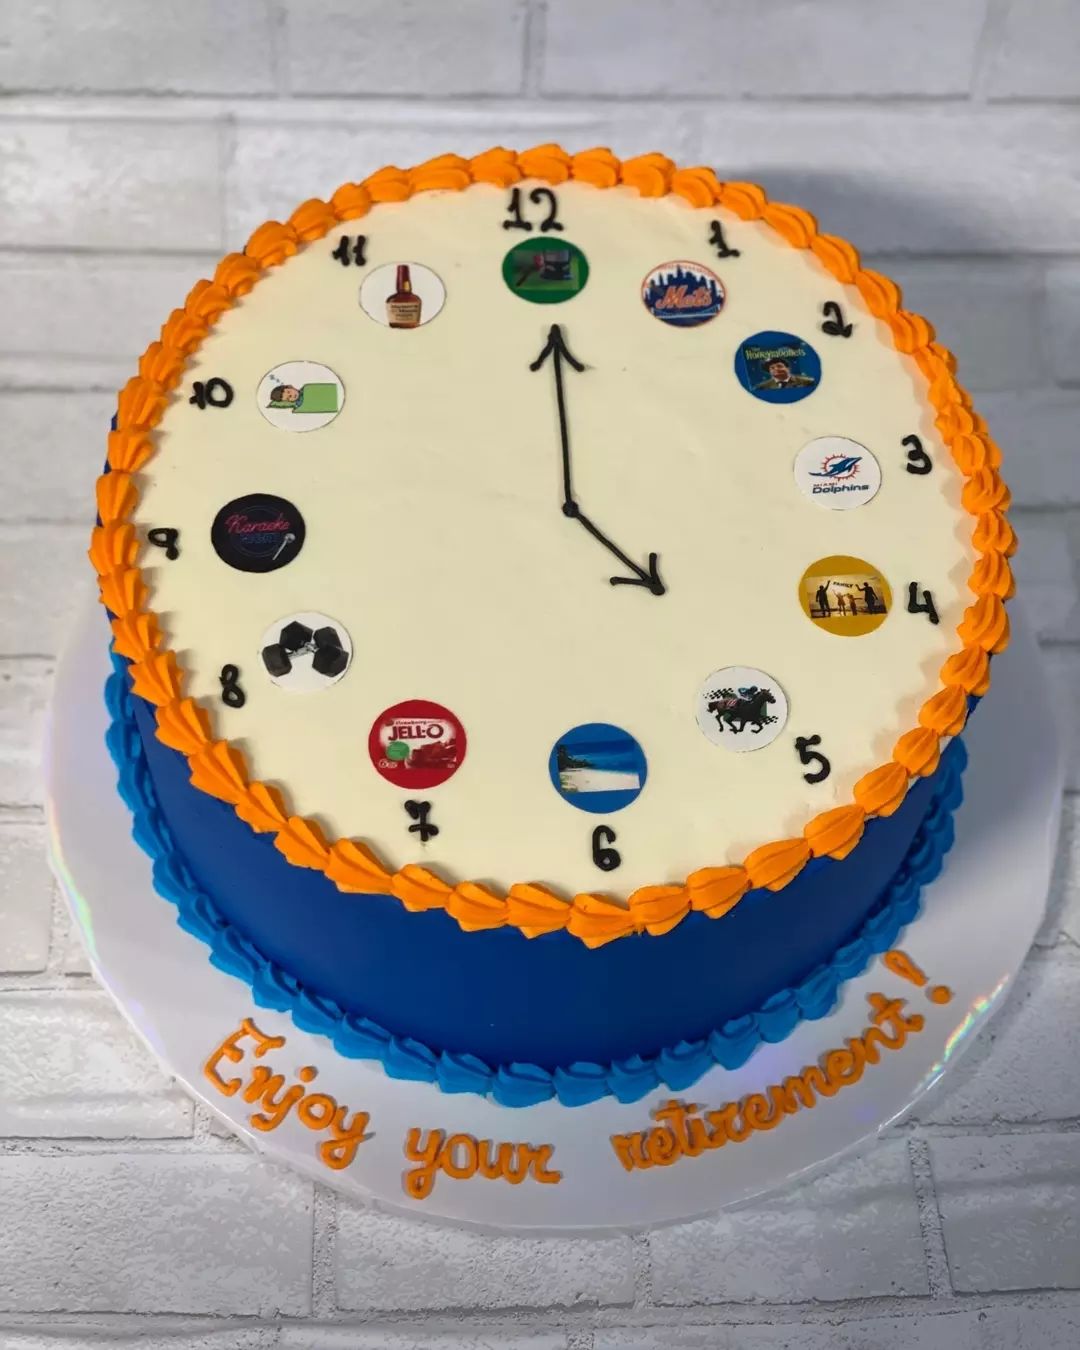 Retirement Cake Sayings and Messages - WishesMsg